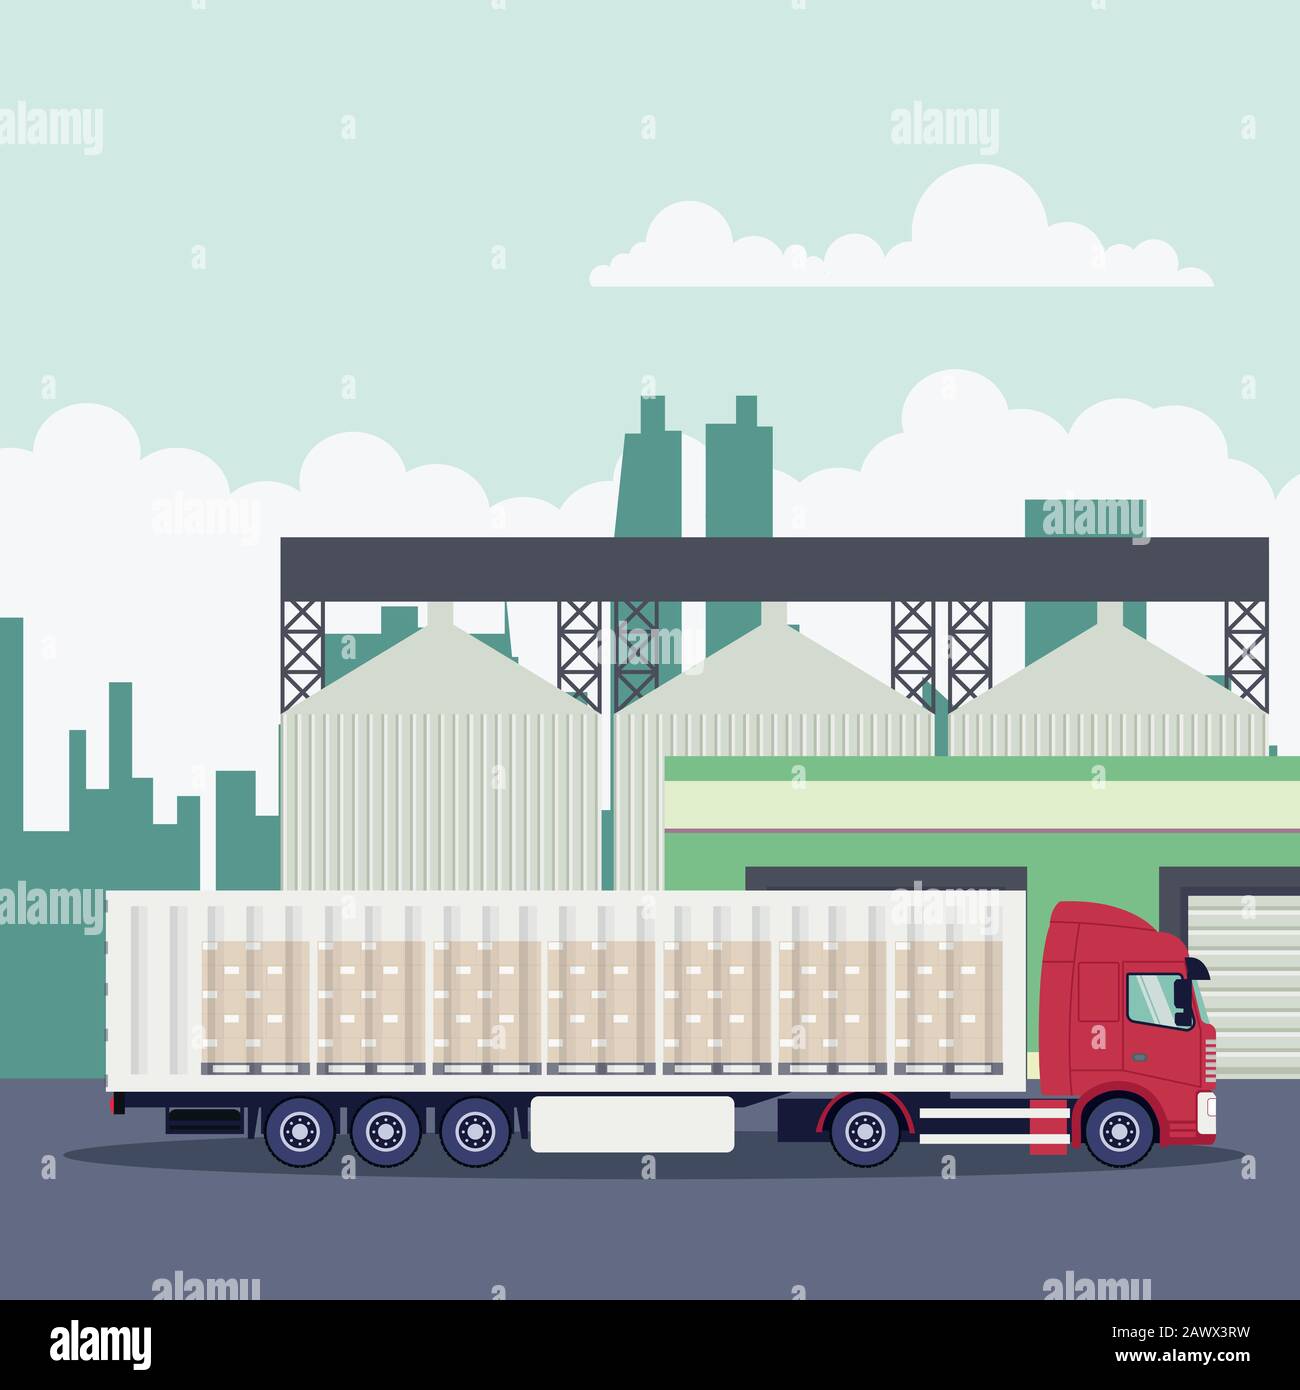 Industrial transport logistics with container truck Stock Vector